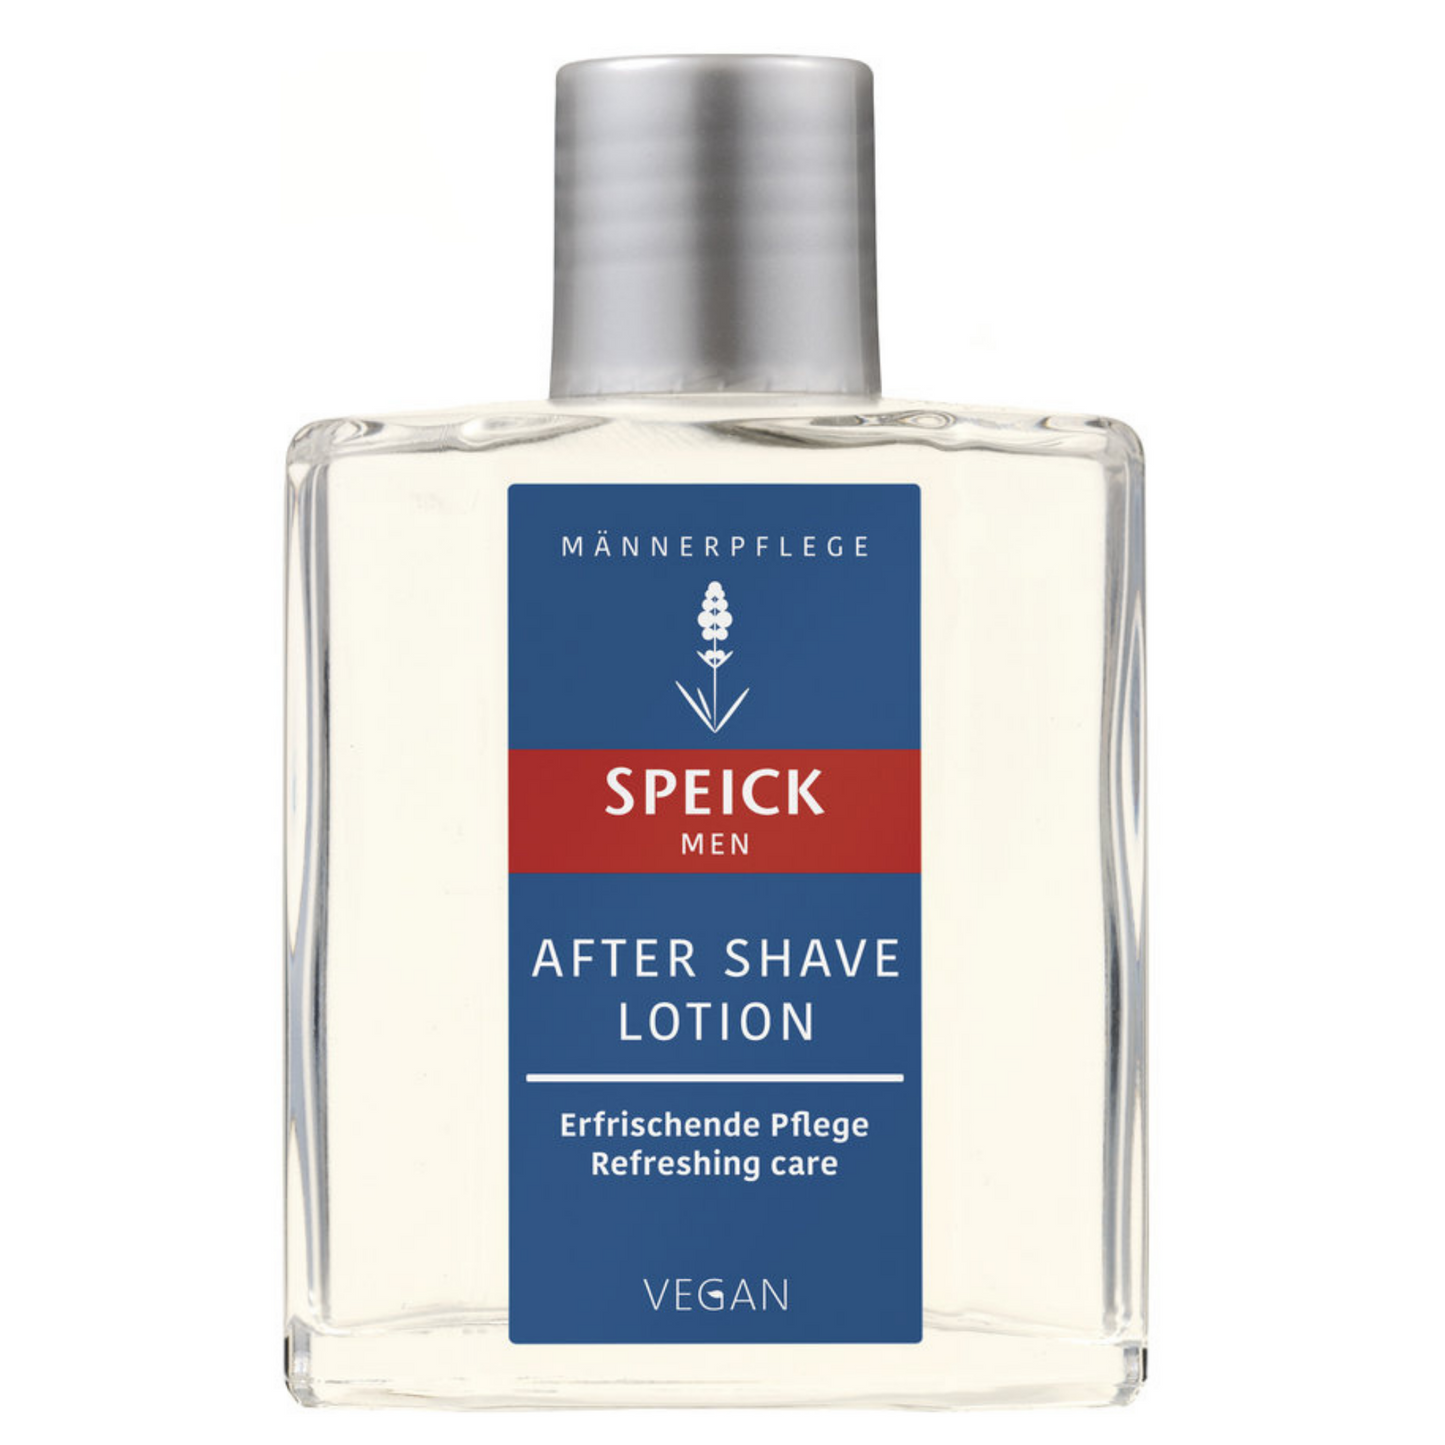 Primary image of After Shave Lotion 